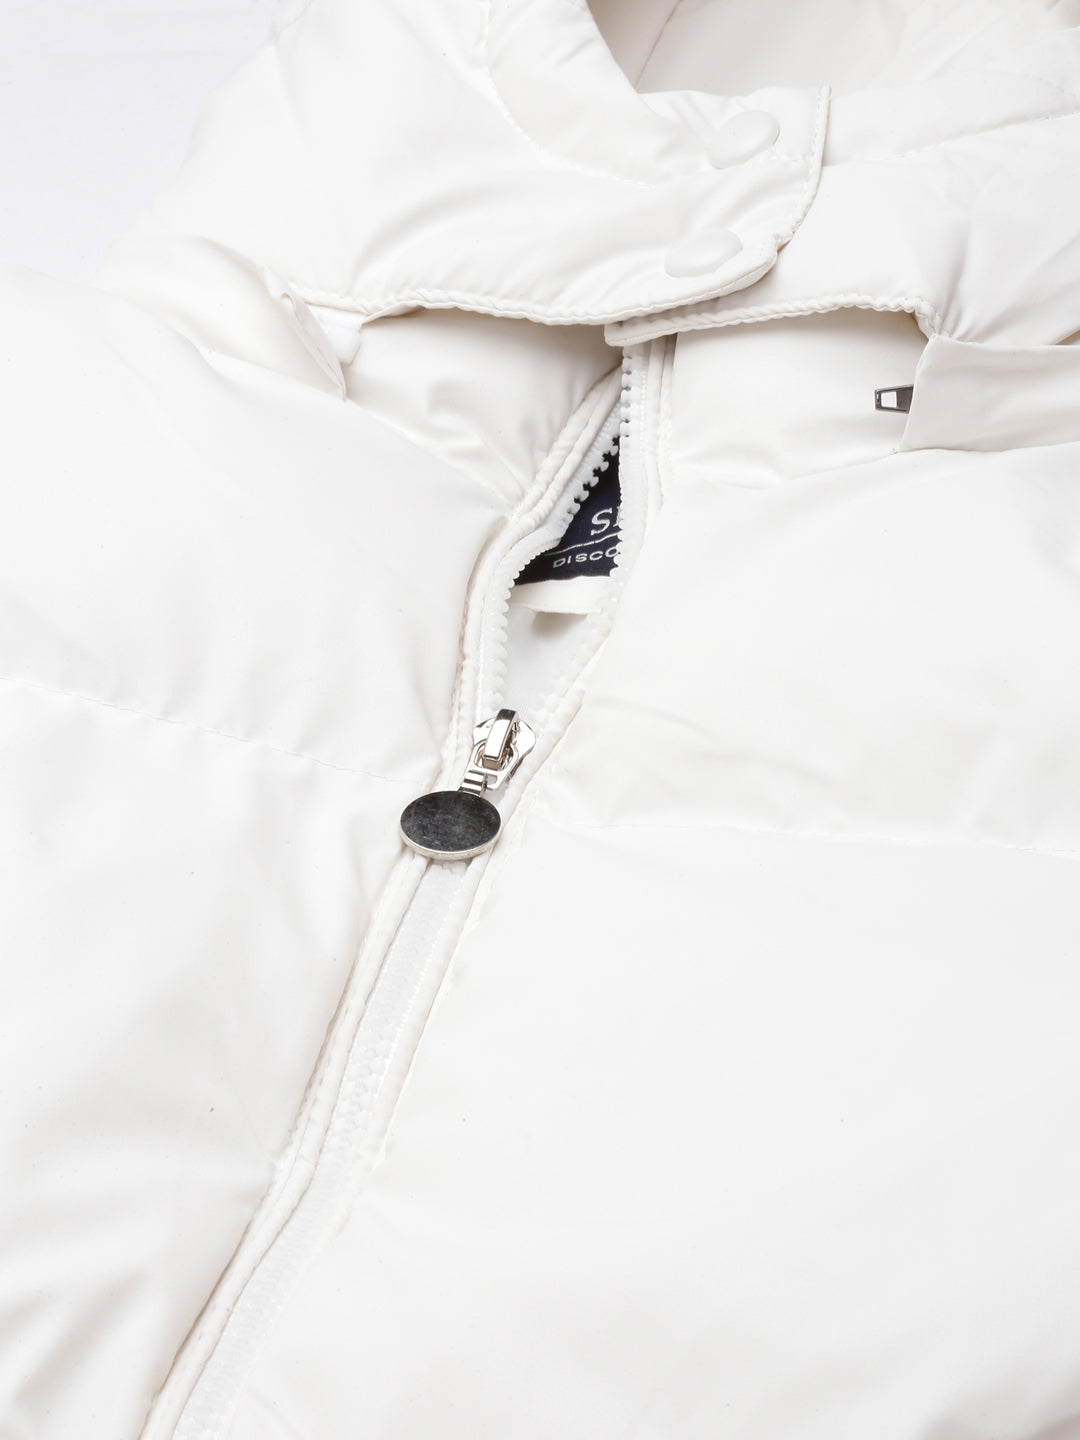 Women Solid White Puffer Jacket Comes with Detachable Hood